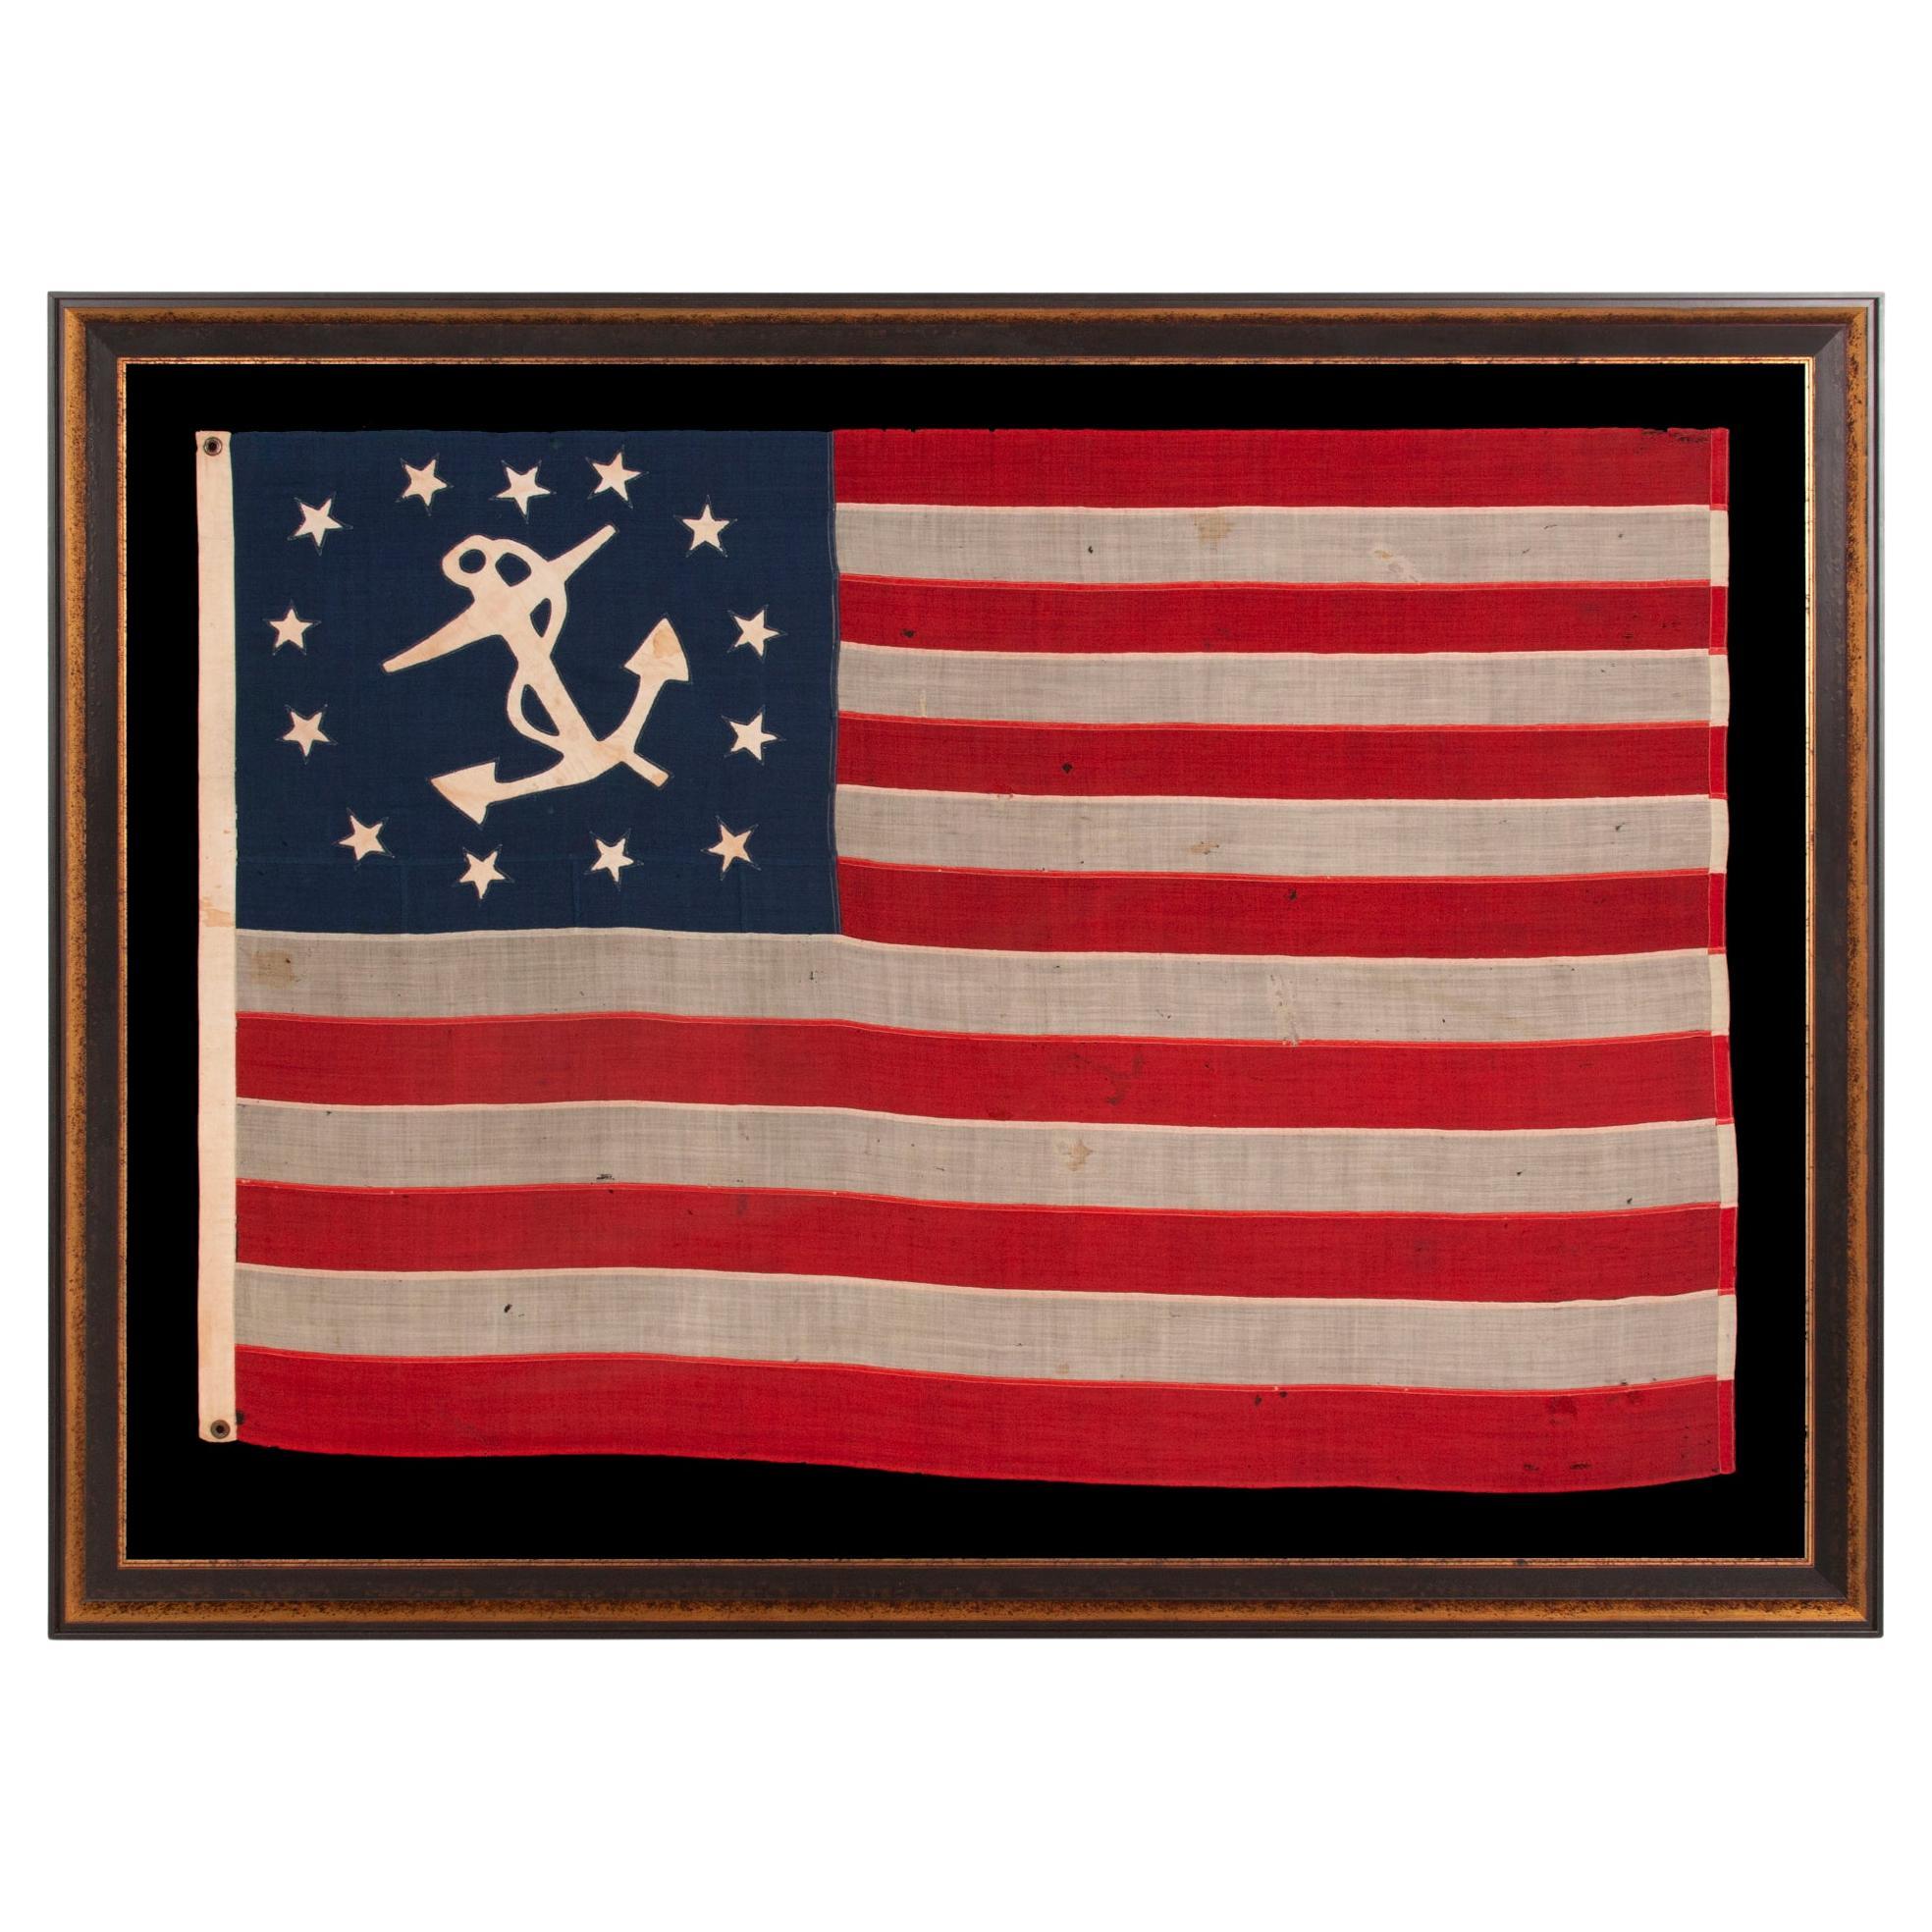 Outstanding 13 Star Hand-sewn American Private Yacht Flag, ca 1865-1885 For Sale